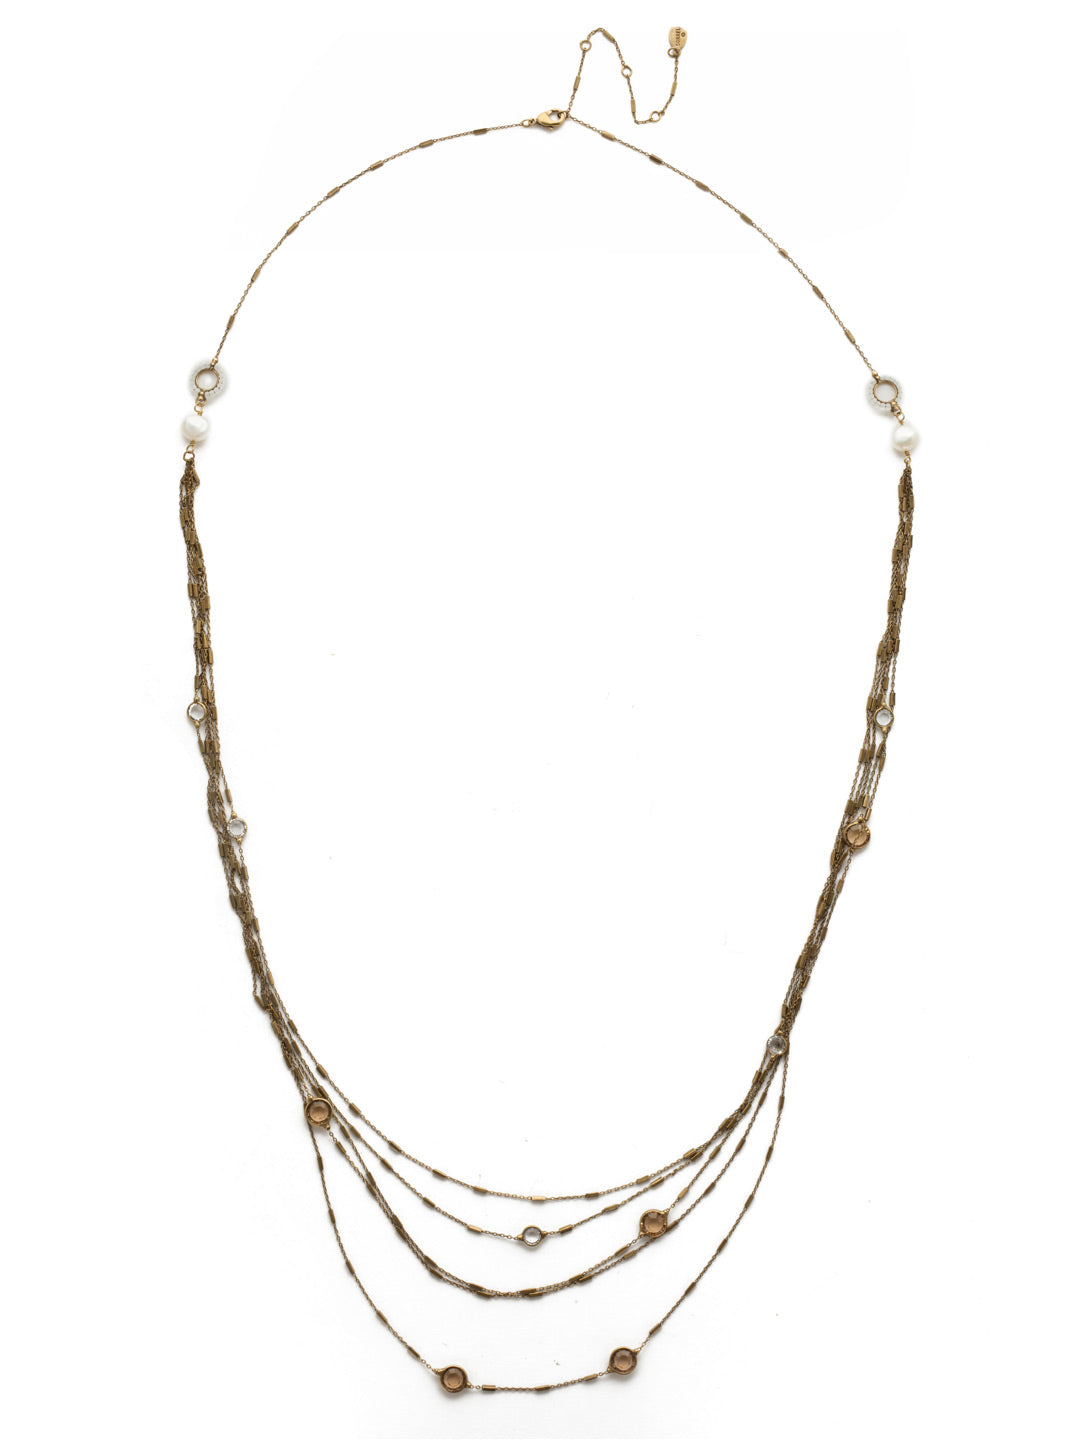 Luminous Layered Necklace - NEK2AGROB - <p>Fasten on layers of filagree, sparkling crystals and freshwater pearl accents with this long strand necklace and you're set and ready to walk into any room as an accessorizing star. From Sorrelli's Rocky Beach collection in our Antique Gold-tone finish.</p>